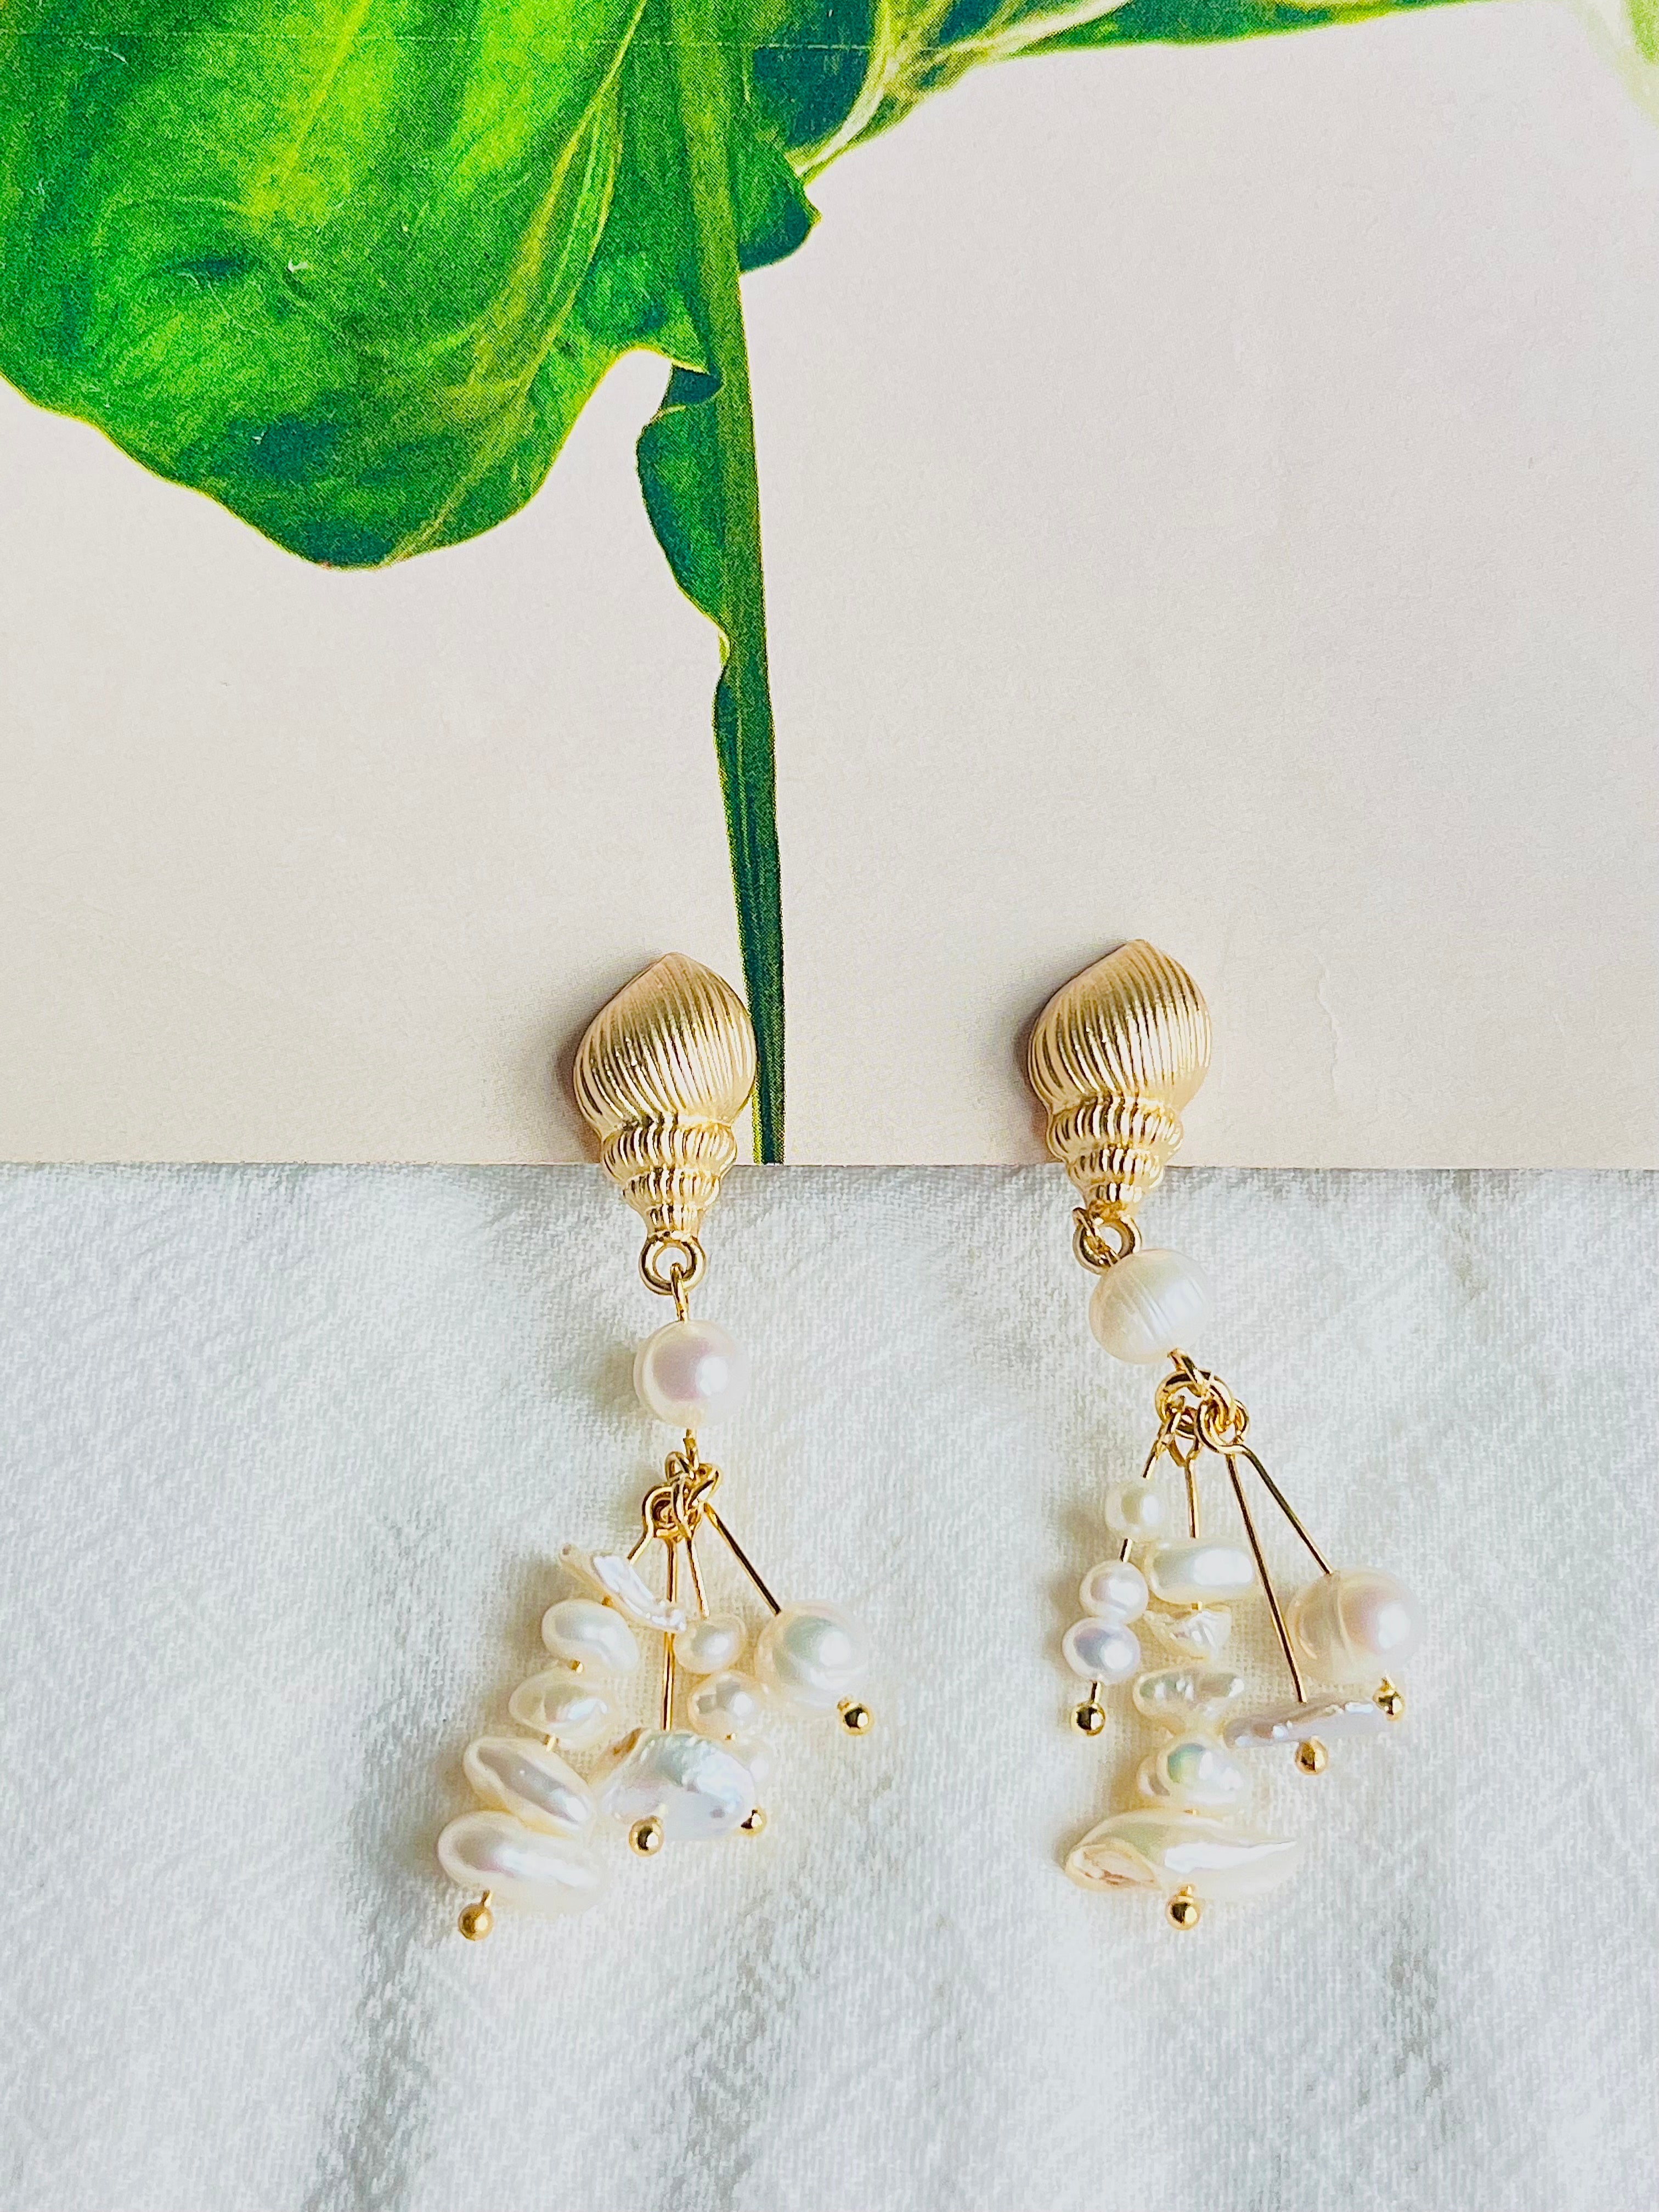 Natural White Irregular Cluster Pearls Tassel Conch Shell Clip On Earrings, Gold Tone, Swarovski Element

100% handmade. Each one is different. Excellent gift for lady. Very high cost and quality.

Material: Natural pearls, Gold plated metal.

Size: